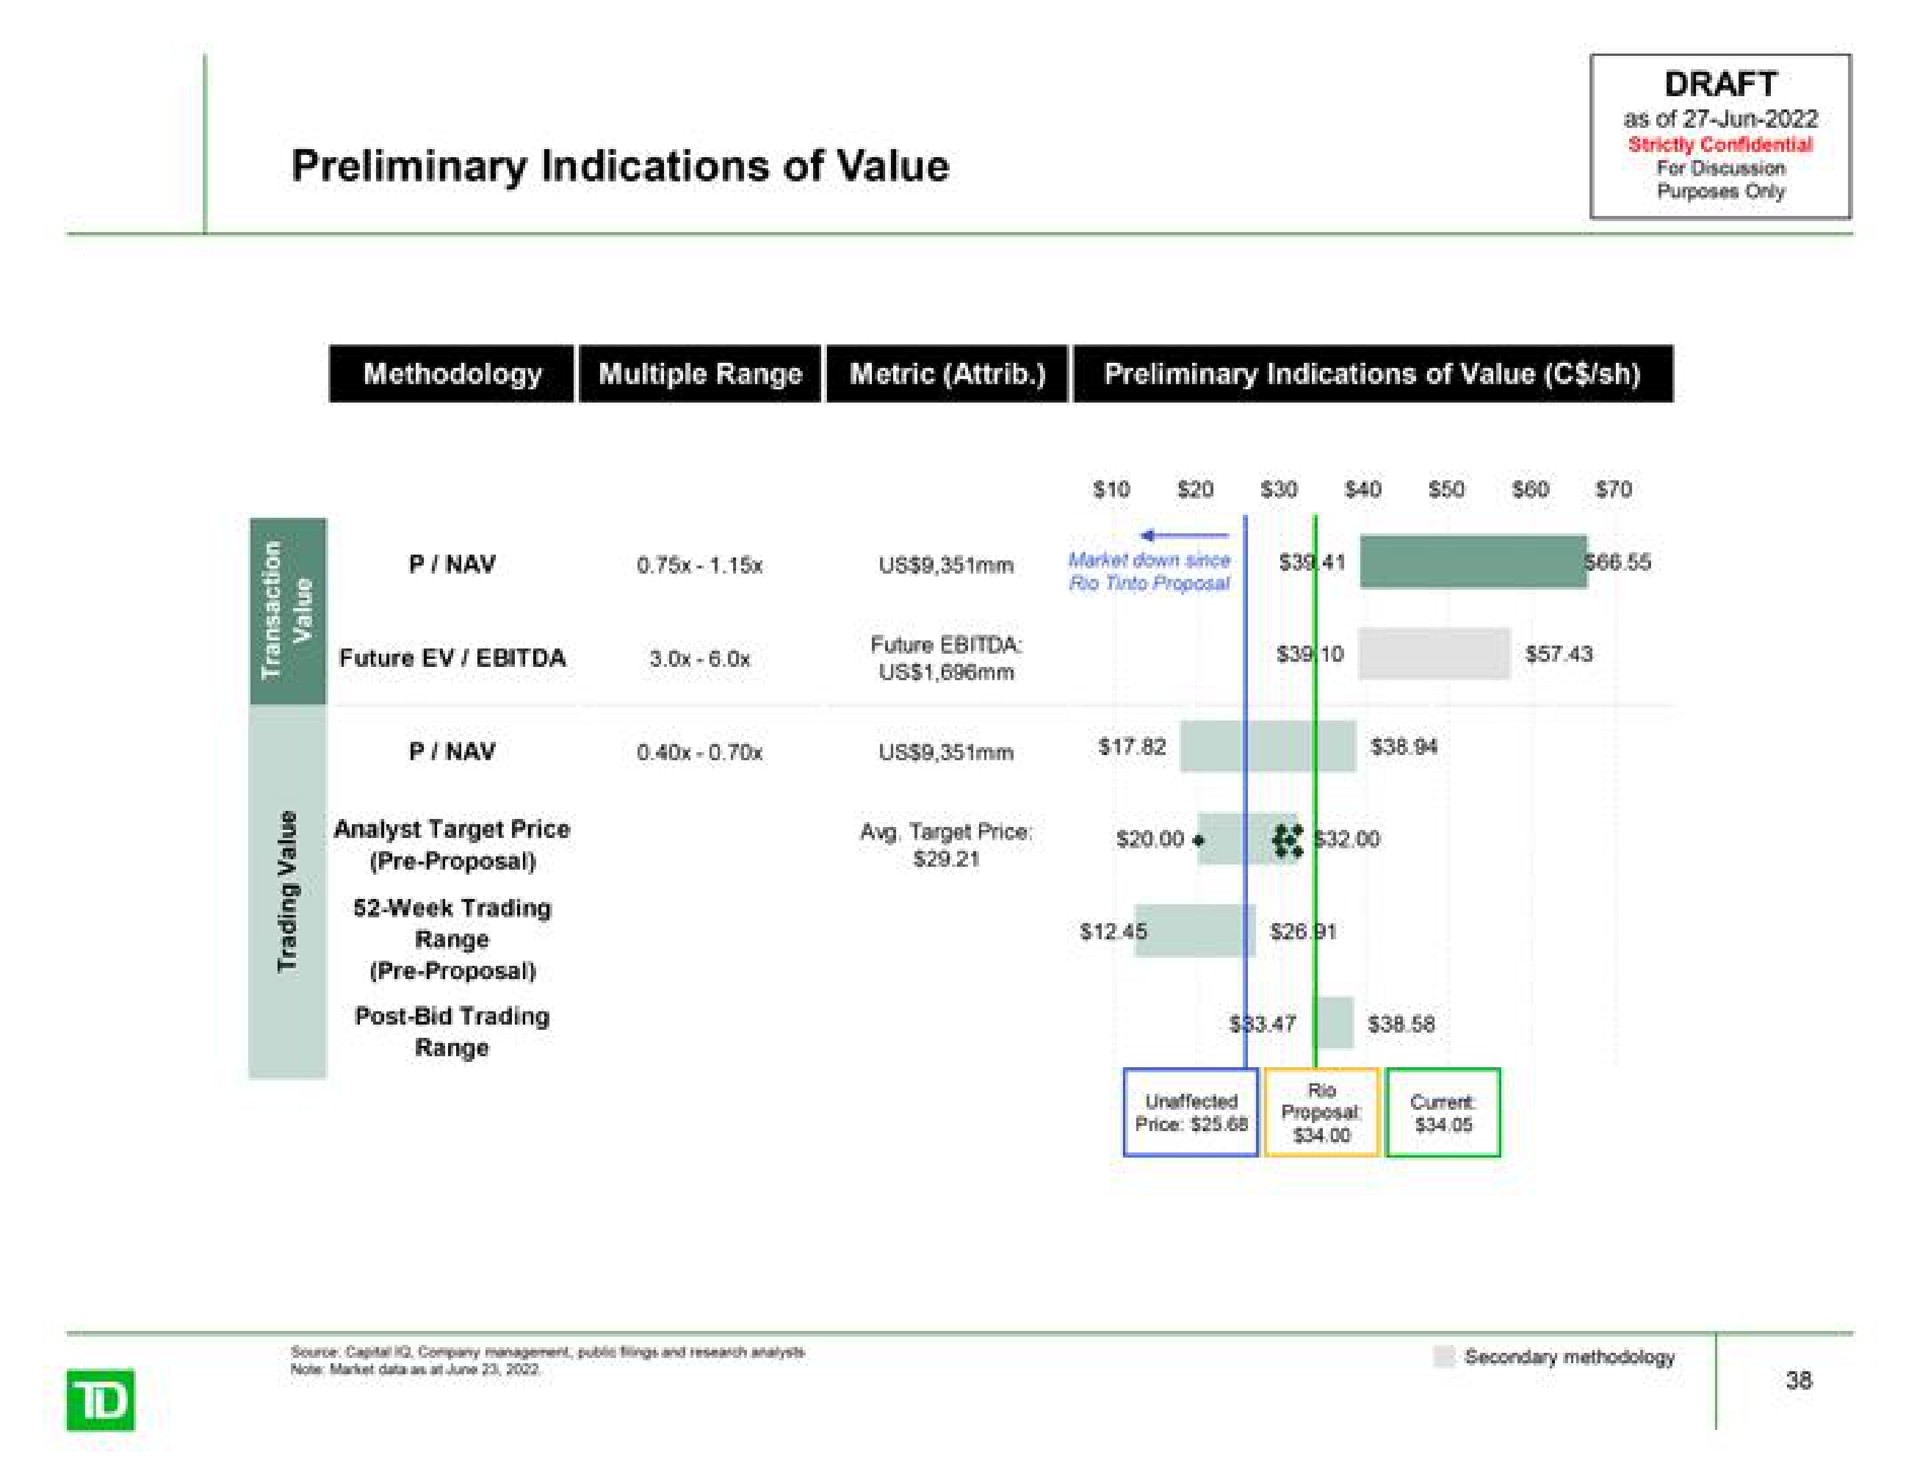 preliminary indications of value a a i secondary methodology | TD Securities